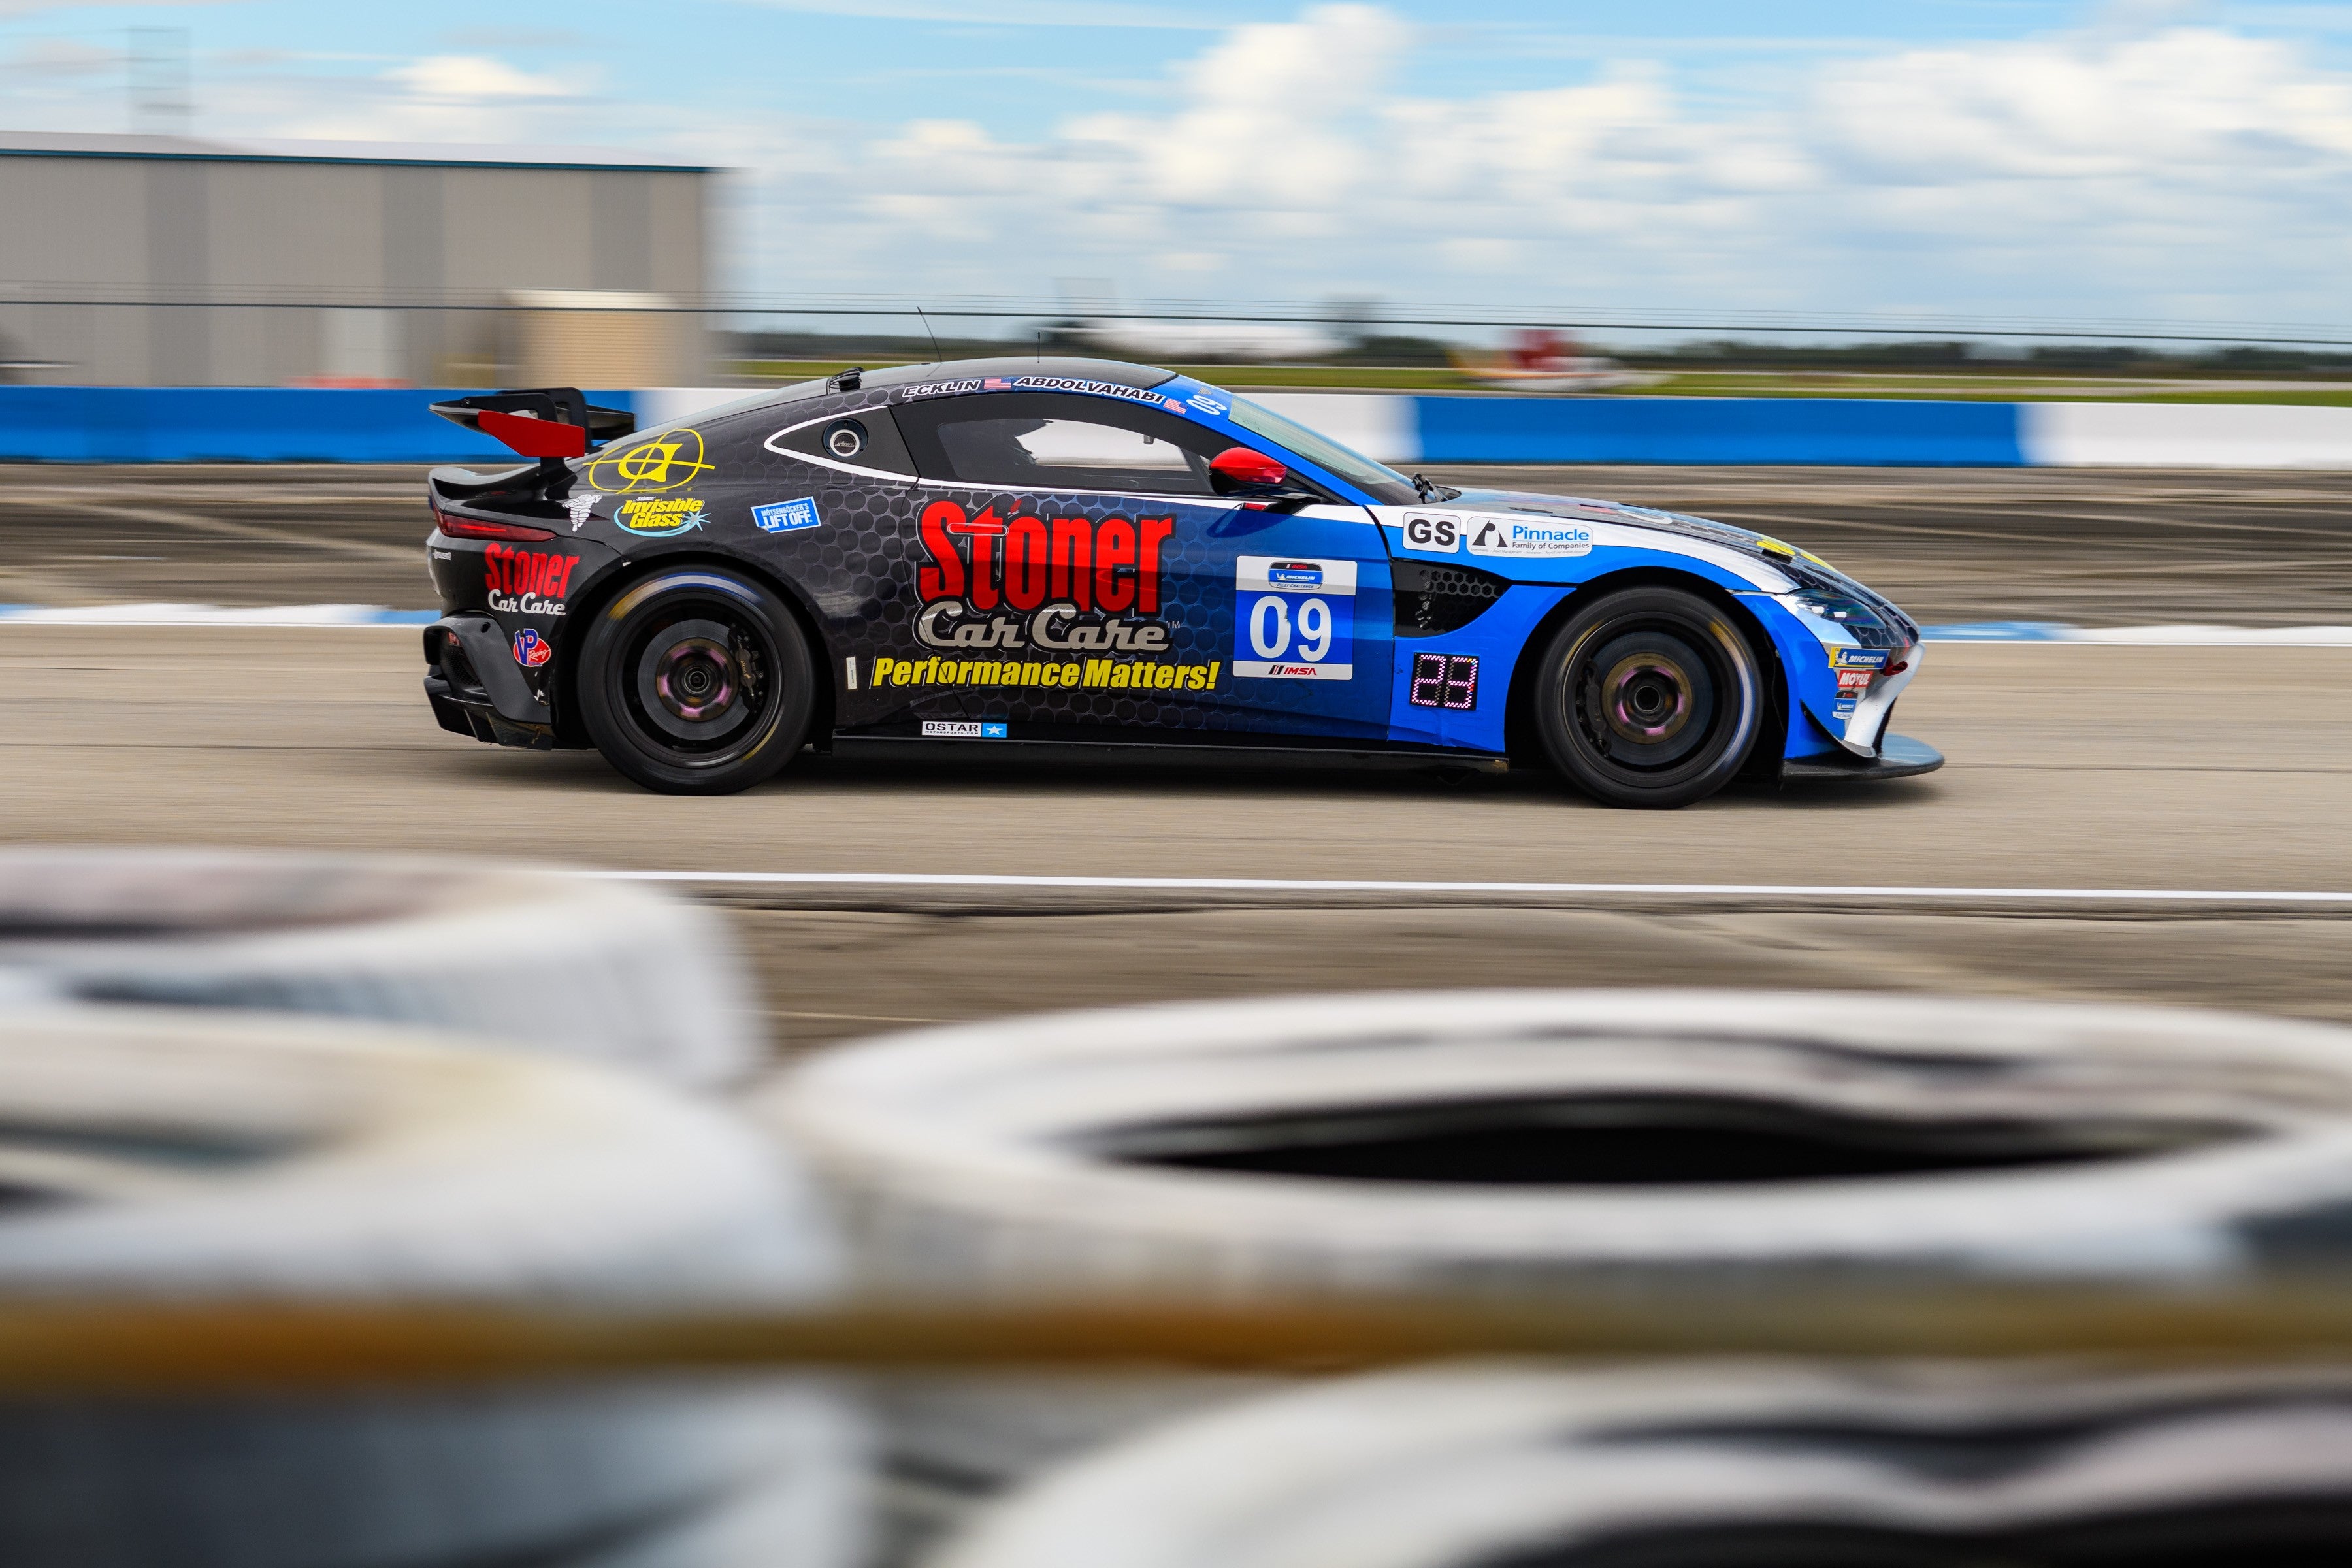 Stoner Car Care Racing Takes Eighth on the Grid at Sebring